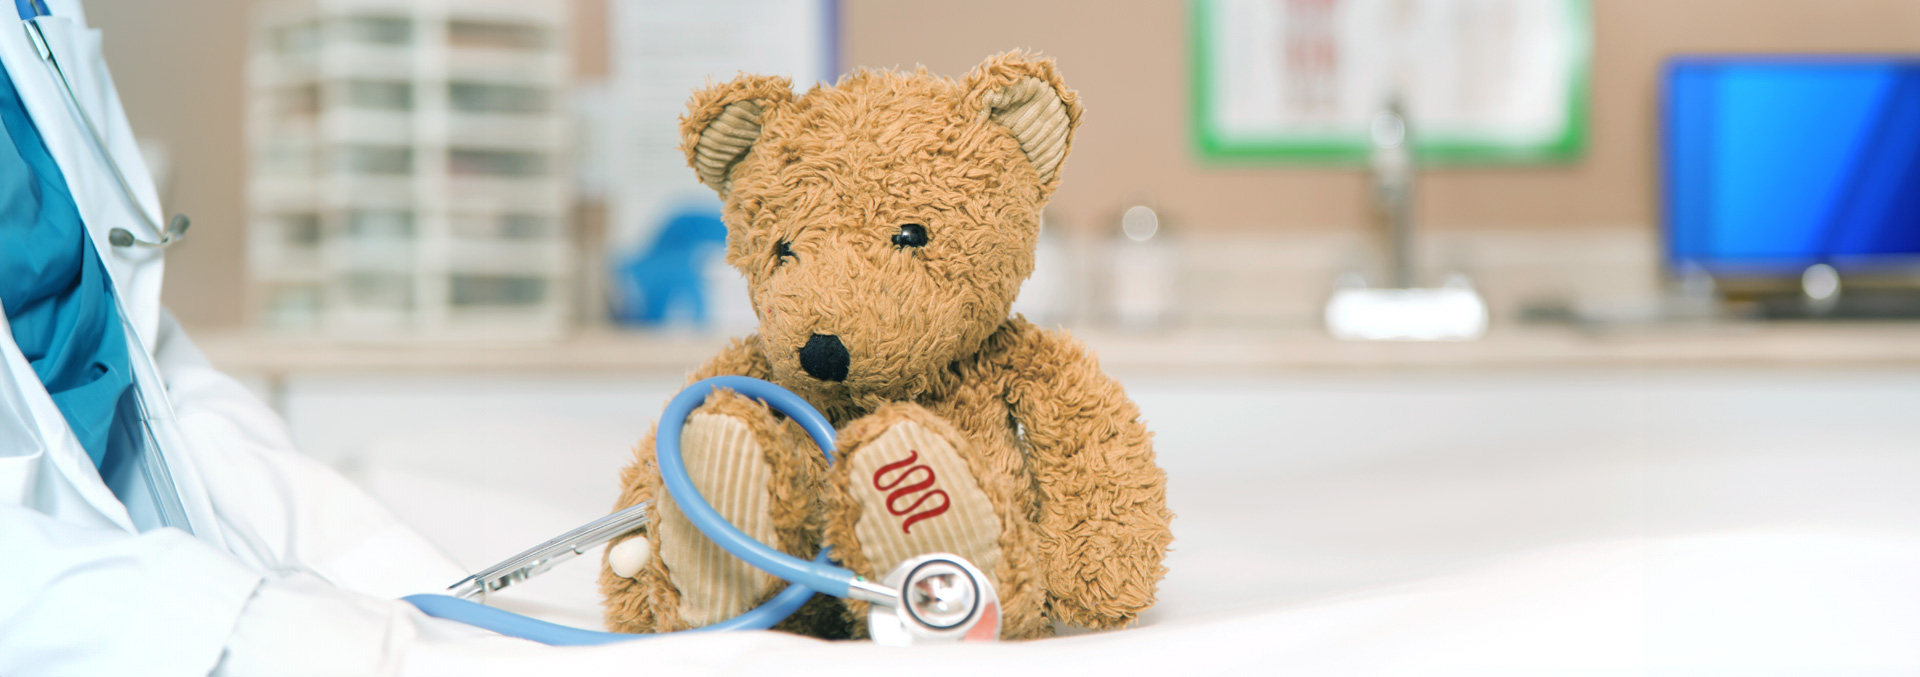 A brown stuffed bear in a medical office.